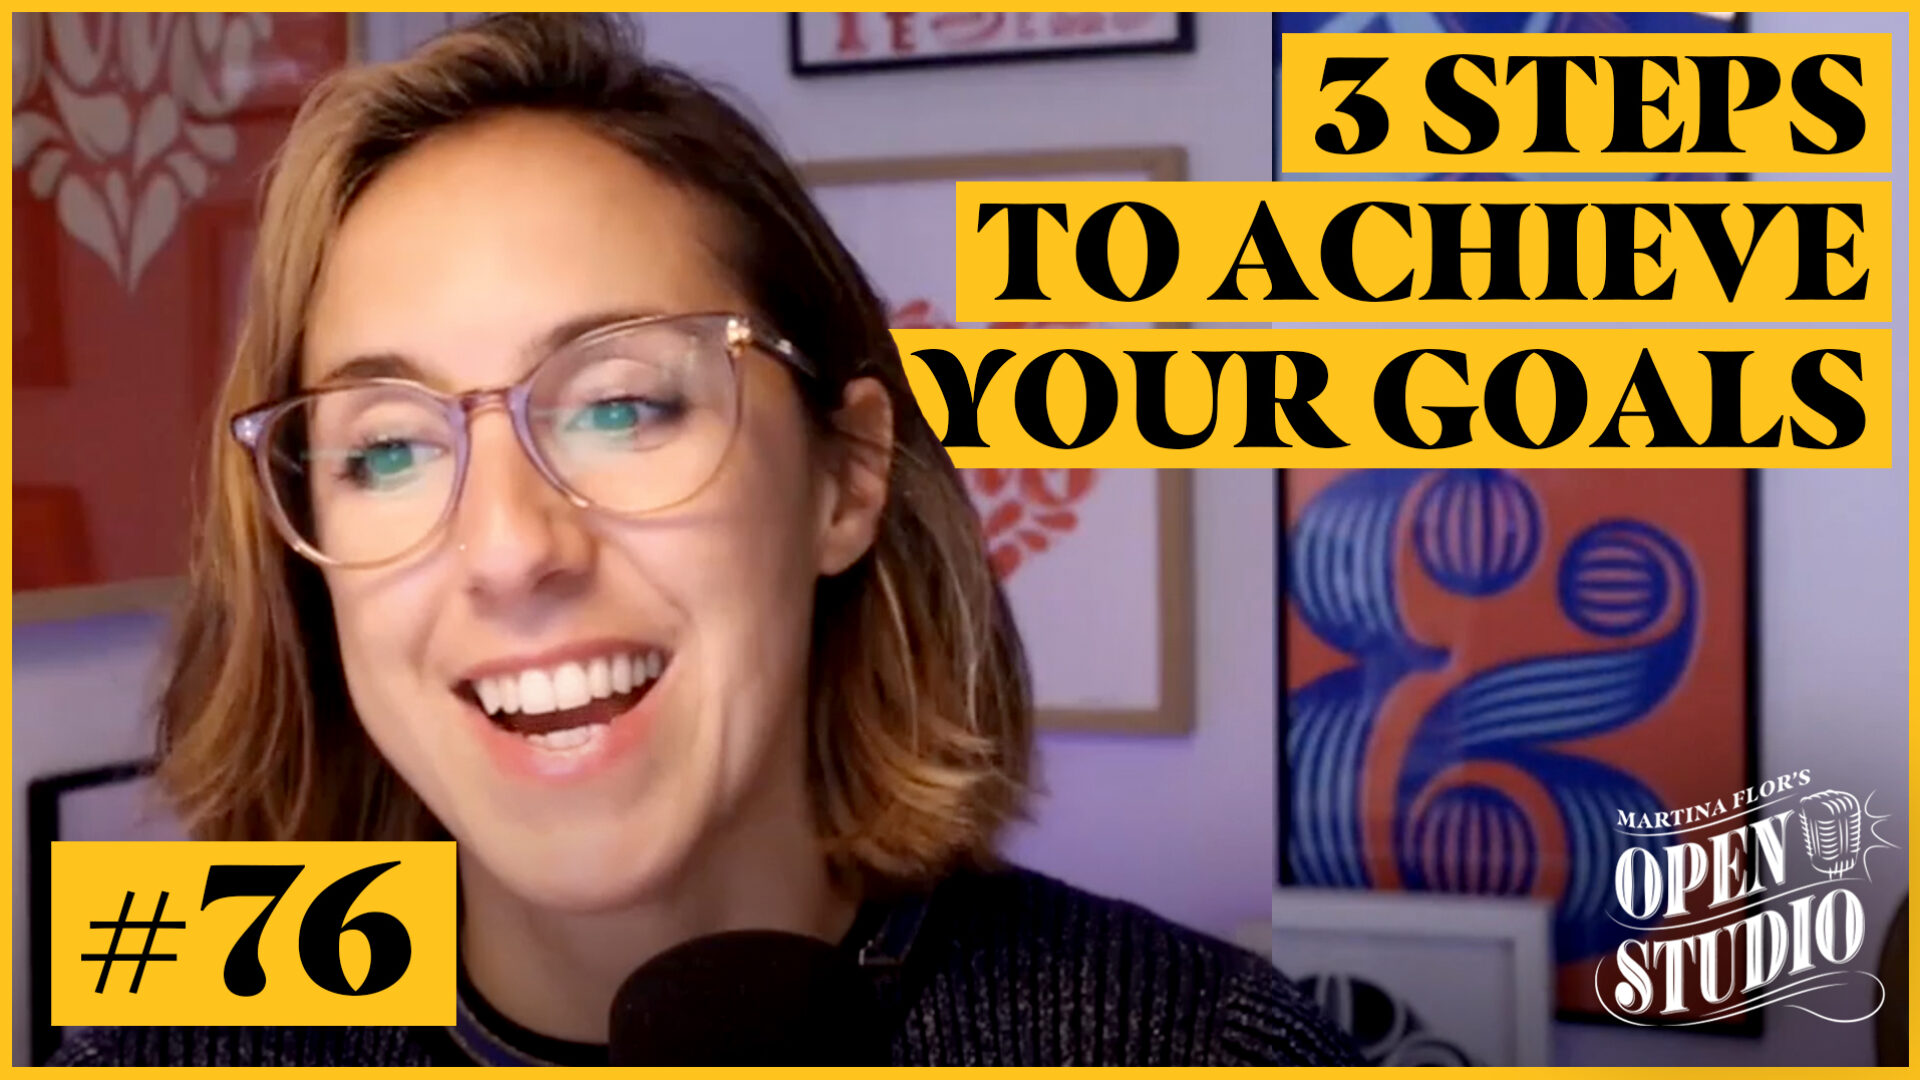 76. Martina Flor – 3 Easy Ways To Achieve Your Goals Before The End Of The Year